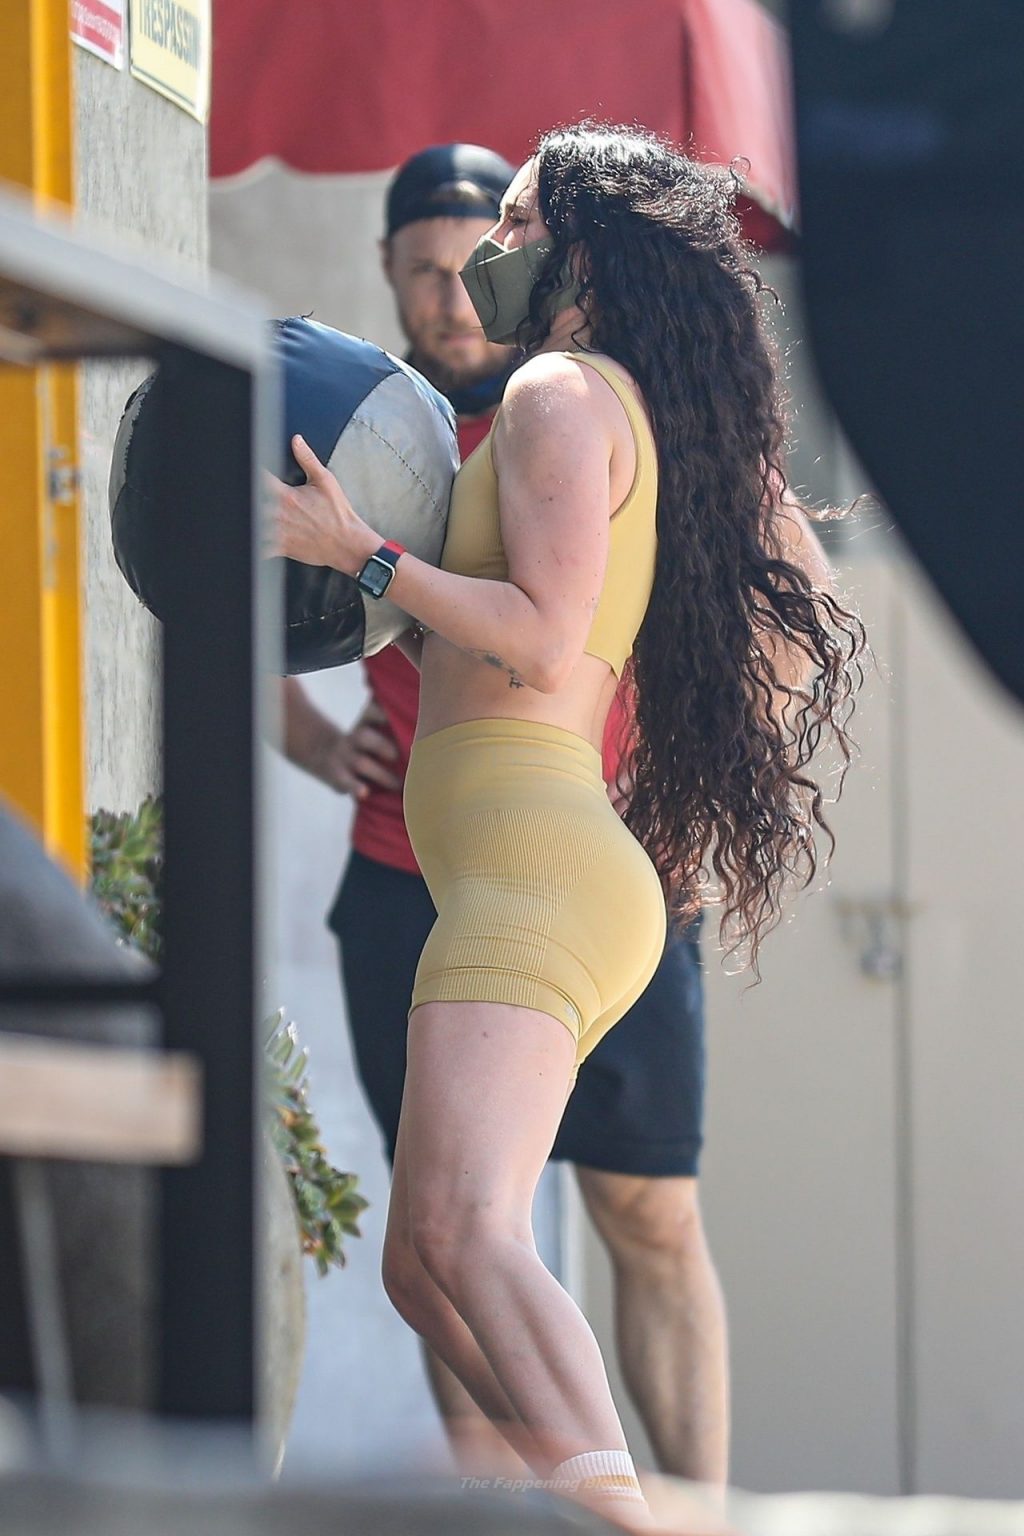 Rumer Willis Exercises with Her Trainer Using a Medicine Ball at Rise Nation Gym (124 Photos)